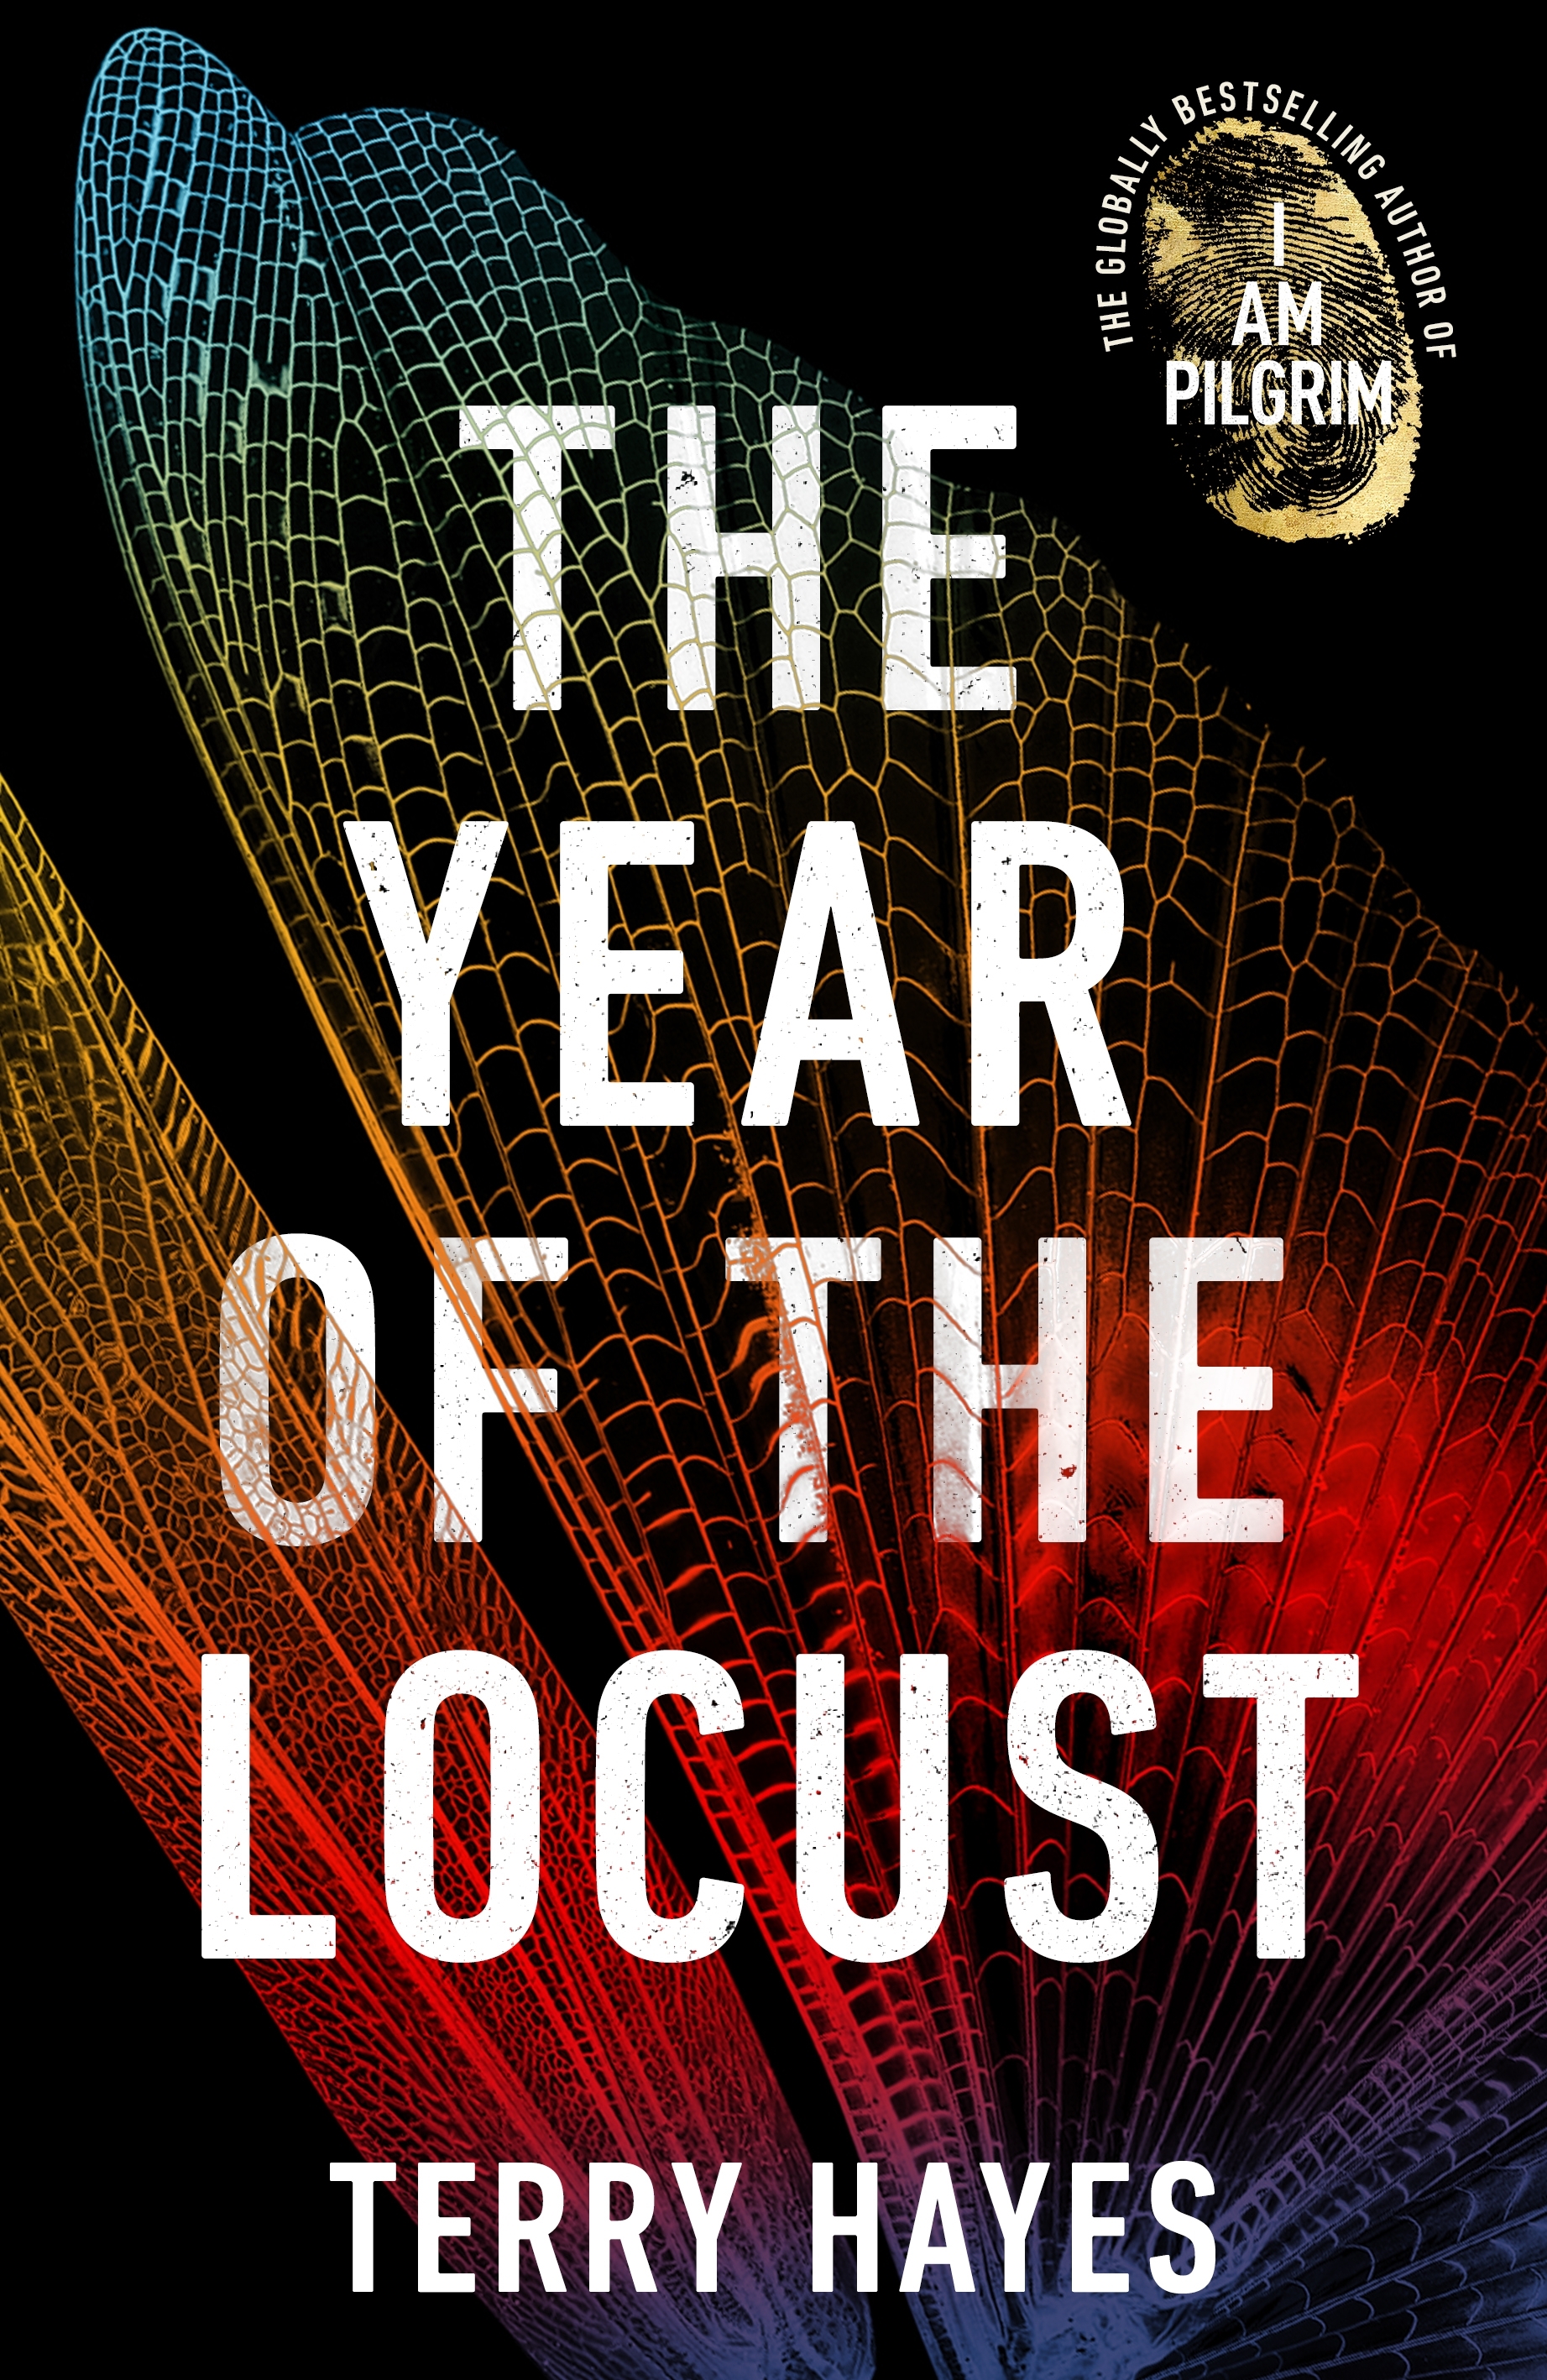 Publisher Transworld Publishers - The Year of the Locust - Terry Hayes